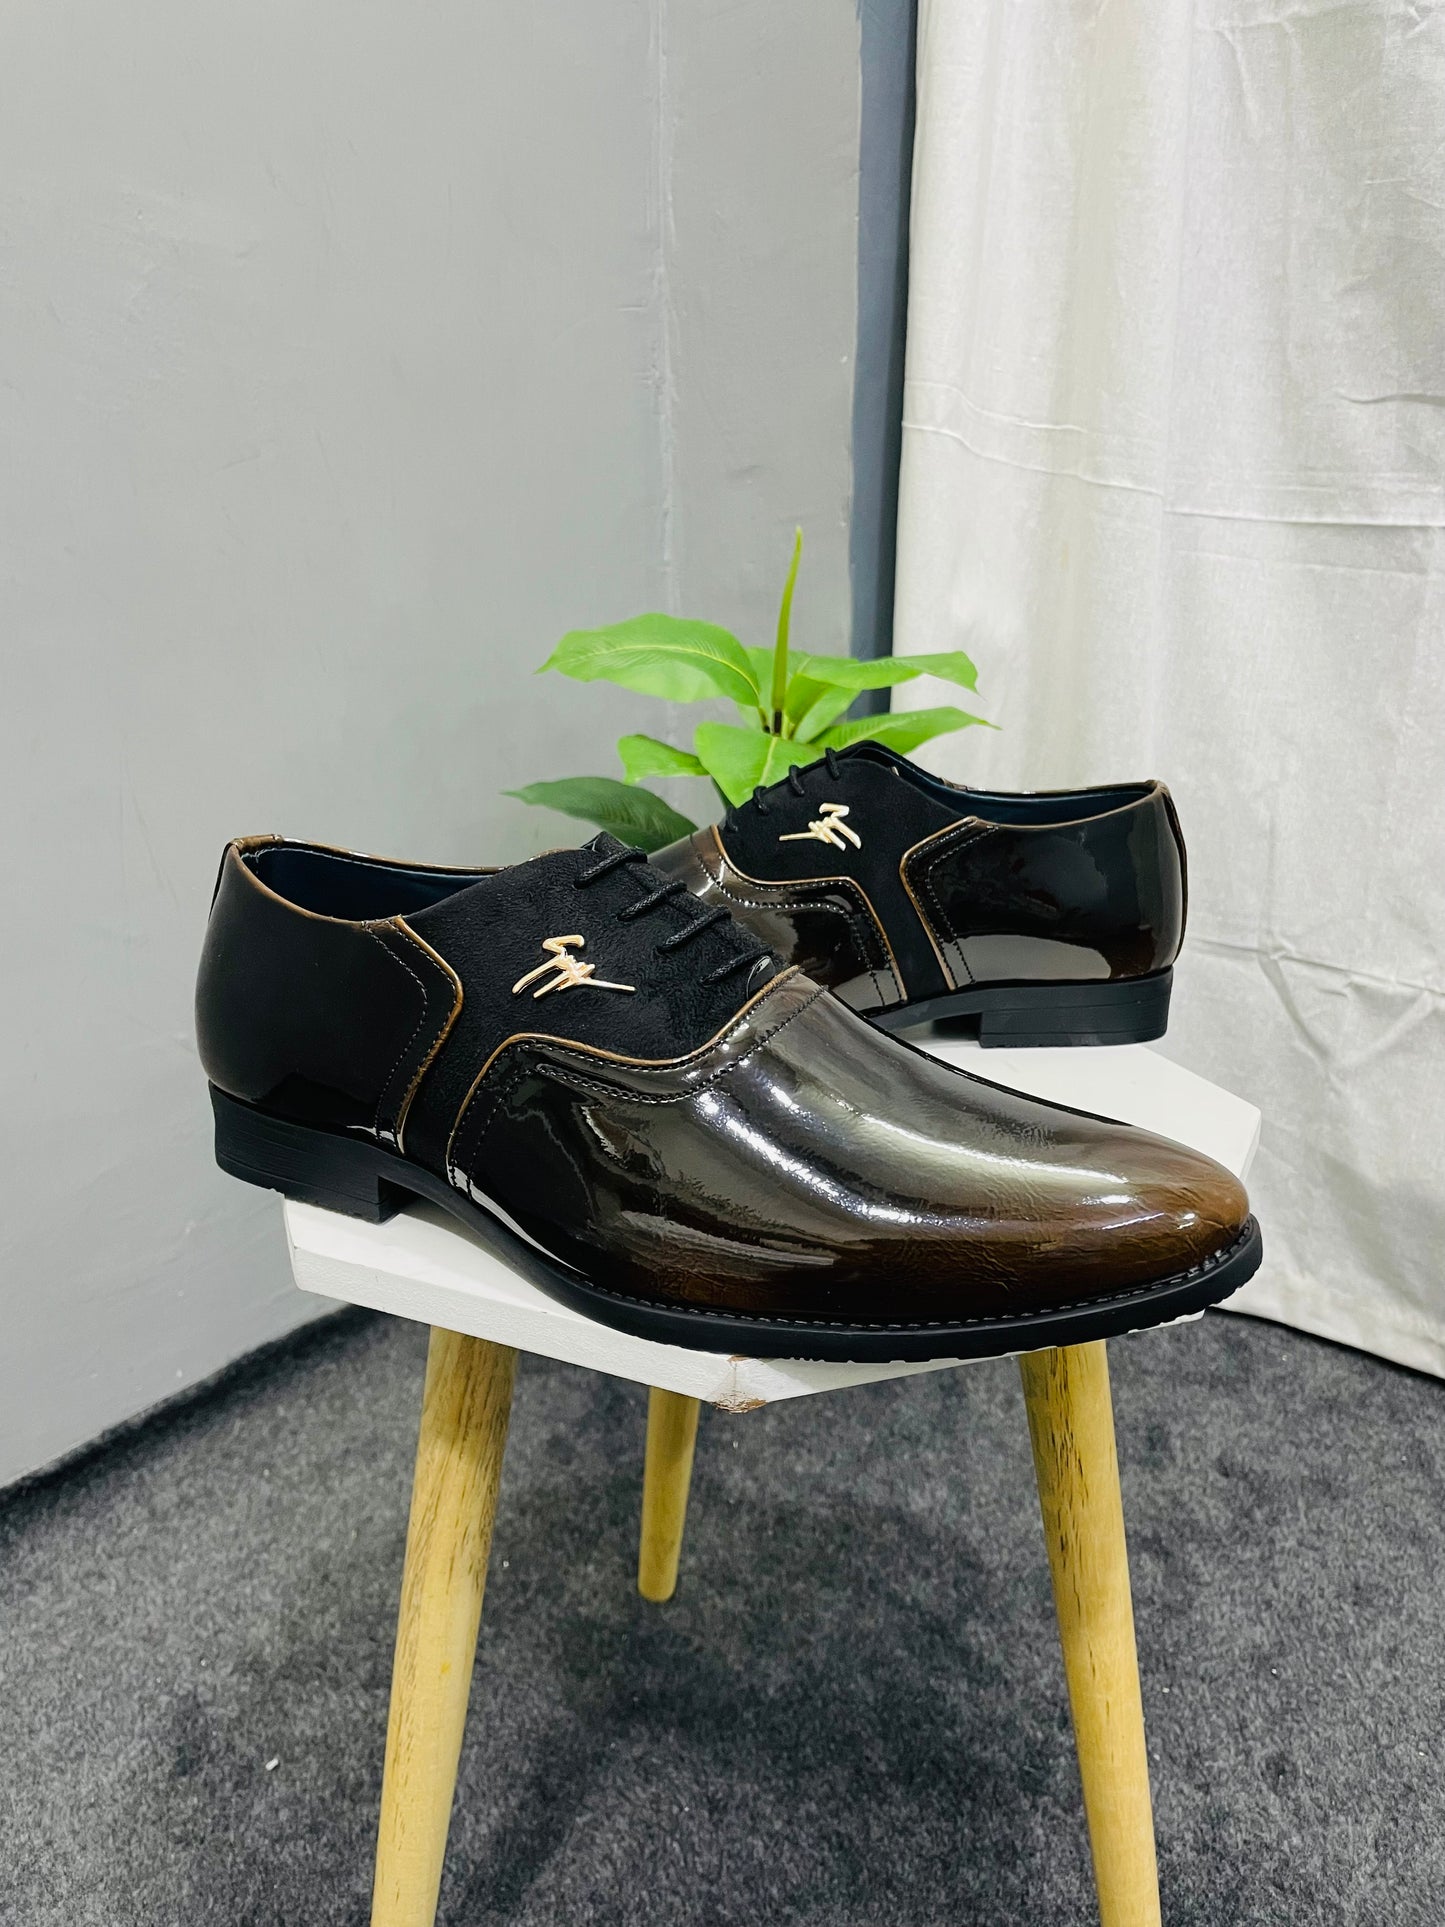 <img src="mens-formal-party-wear-shoes.jpg" alt="Classic Brown patent leather Oxfords - Men's Formal Dress Shoes - Branded Baba">